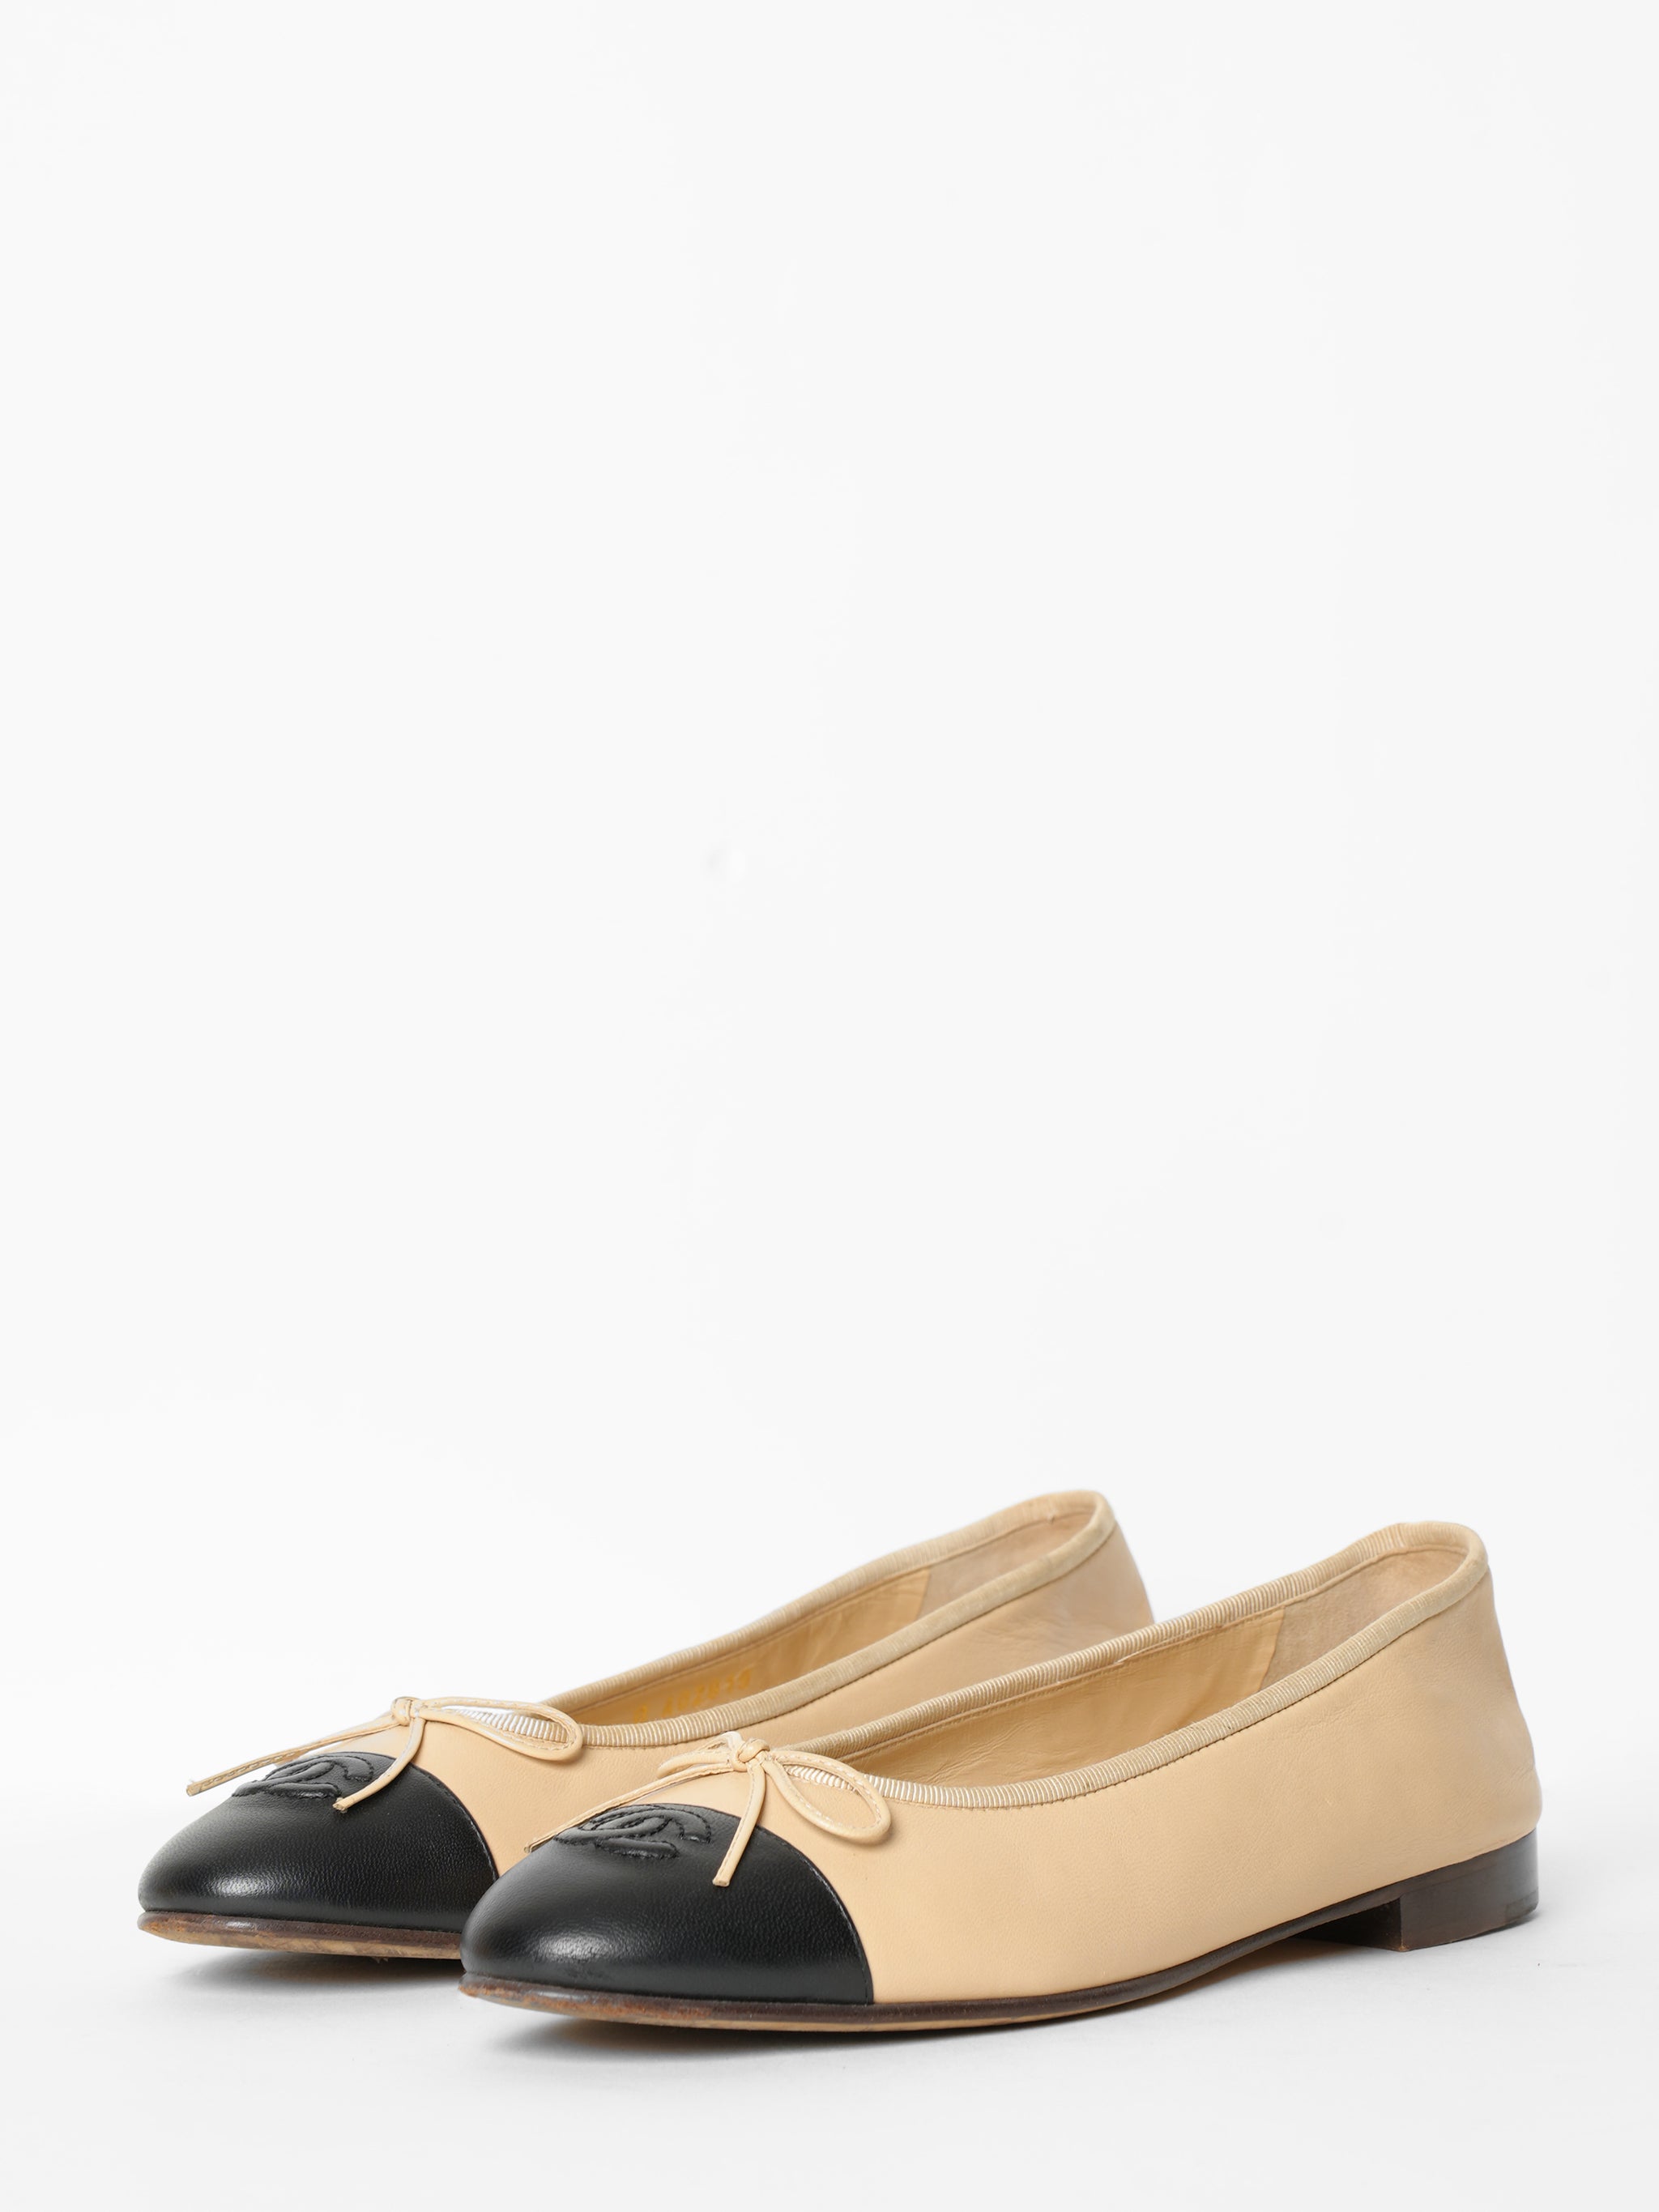 Chanel Cambon Leather Ballet Flats